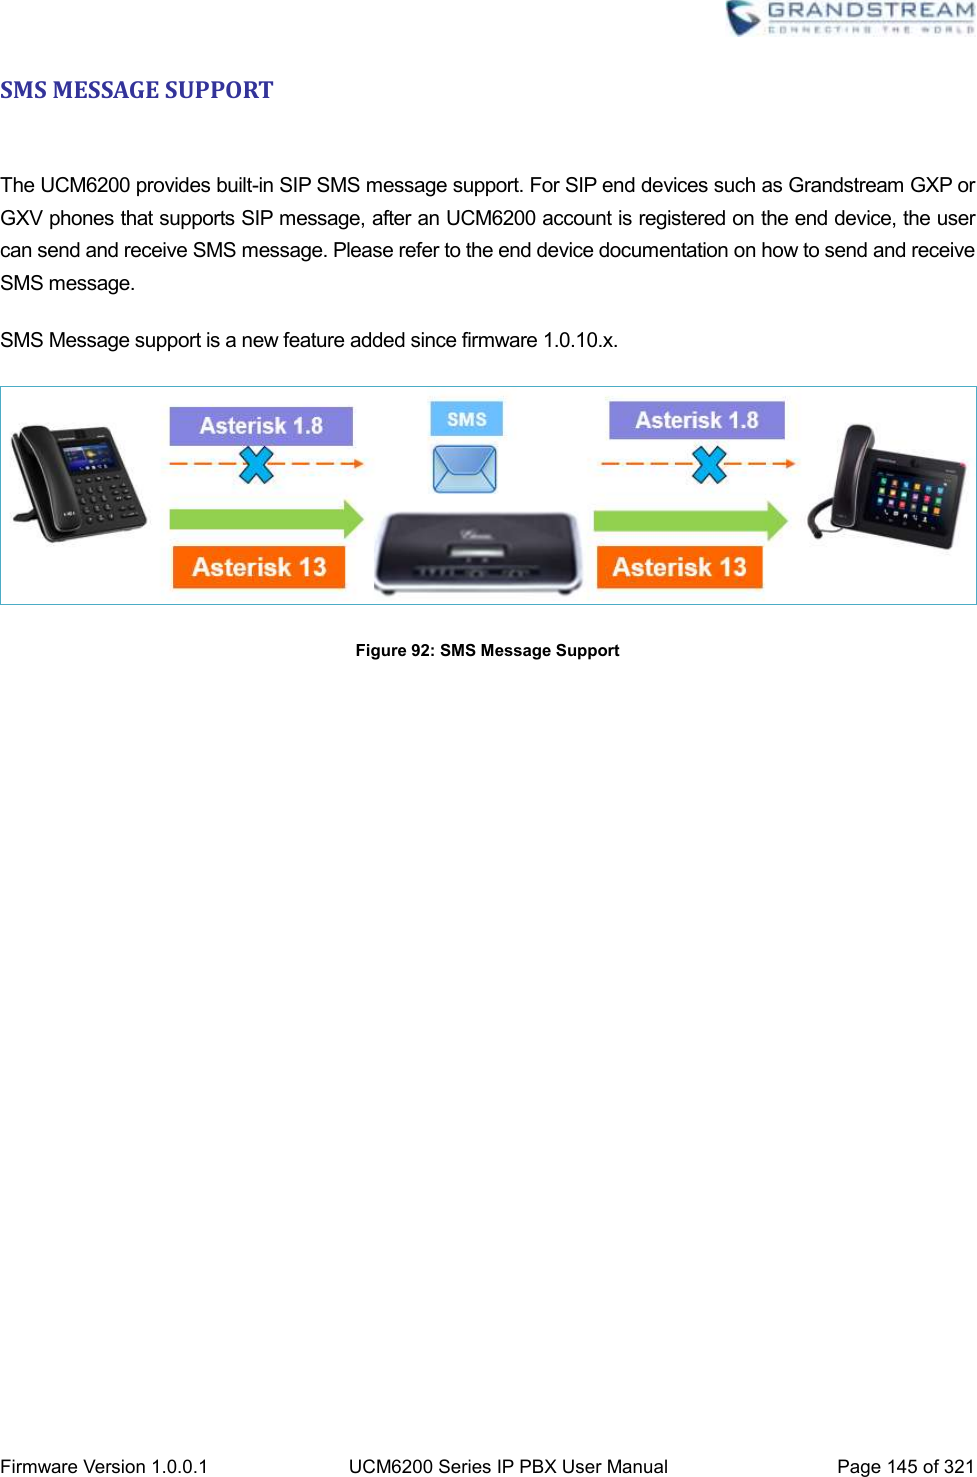  Firmware Version 1.0.0.1 UCM6200 Series IP PBX User Manual Page 145 of 321    SMS MESSAGE SUPPORT  The UCM6200 provides built-in SIP SMS message support. For SIP end devices such as Grandstream GXP or GXV phones that supports SIP message, after an UCM6200 account is registered on the end device, the user can send and receive SMS message. Please refer to the end device documentation on how to send and receive SMS message. SMS Message support is a new feature added since firmware 1.0.10.x.  Figure 92: SMS Message Support      